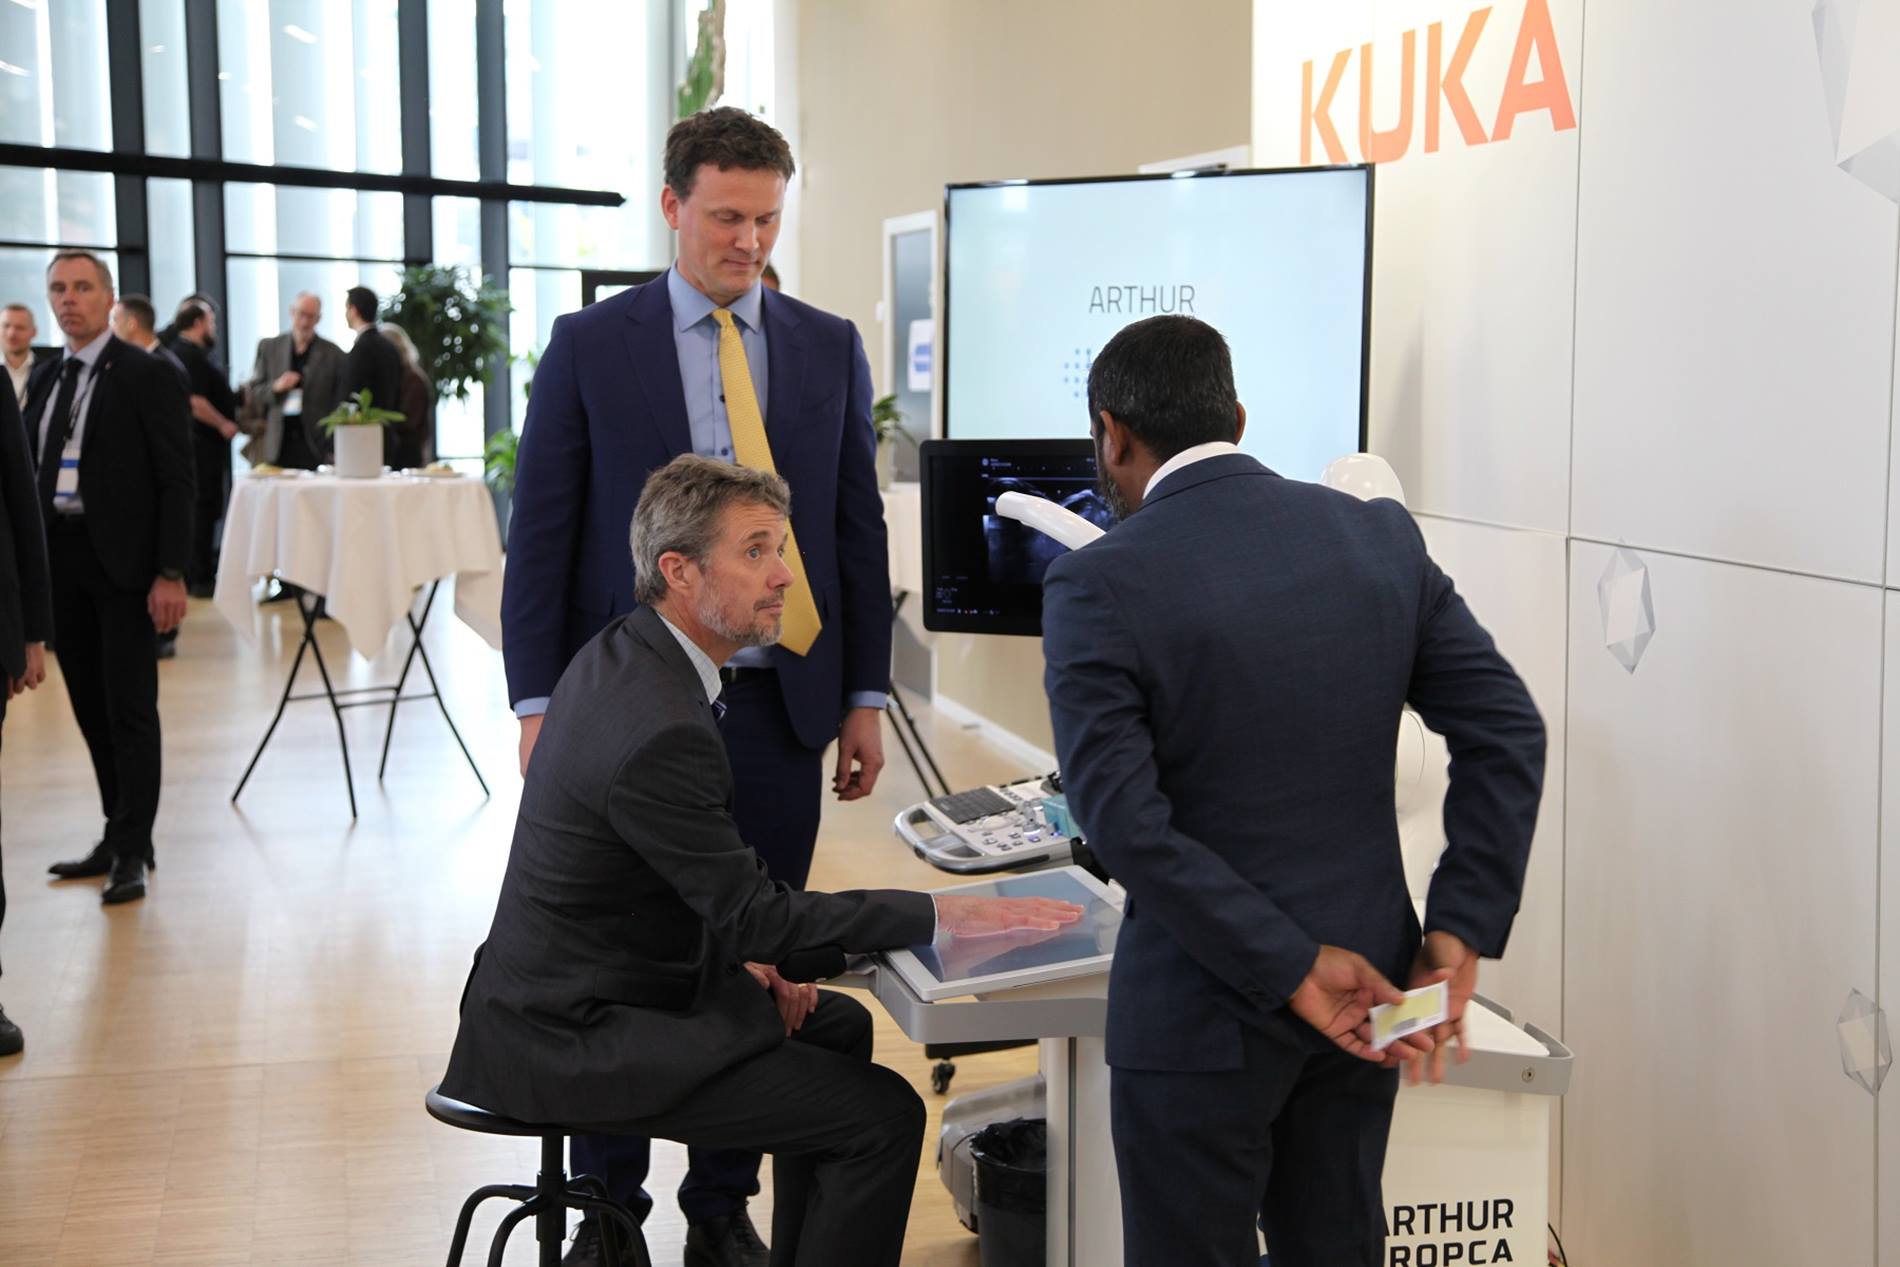 Prince Frederik of Denmark visits the KUKA booth at the European Robotics Forum (ERF) in Odense. 